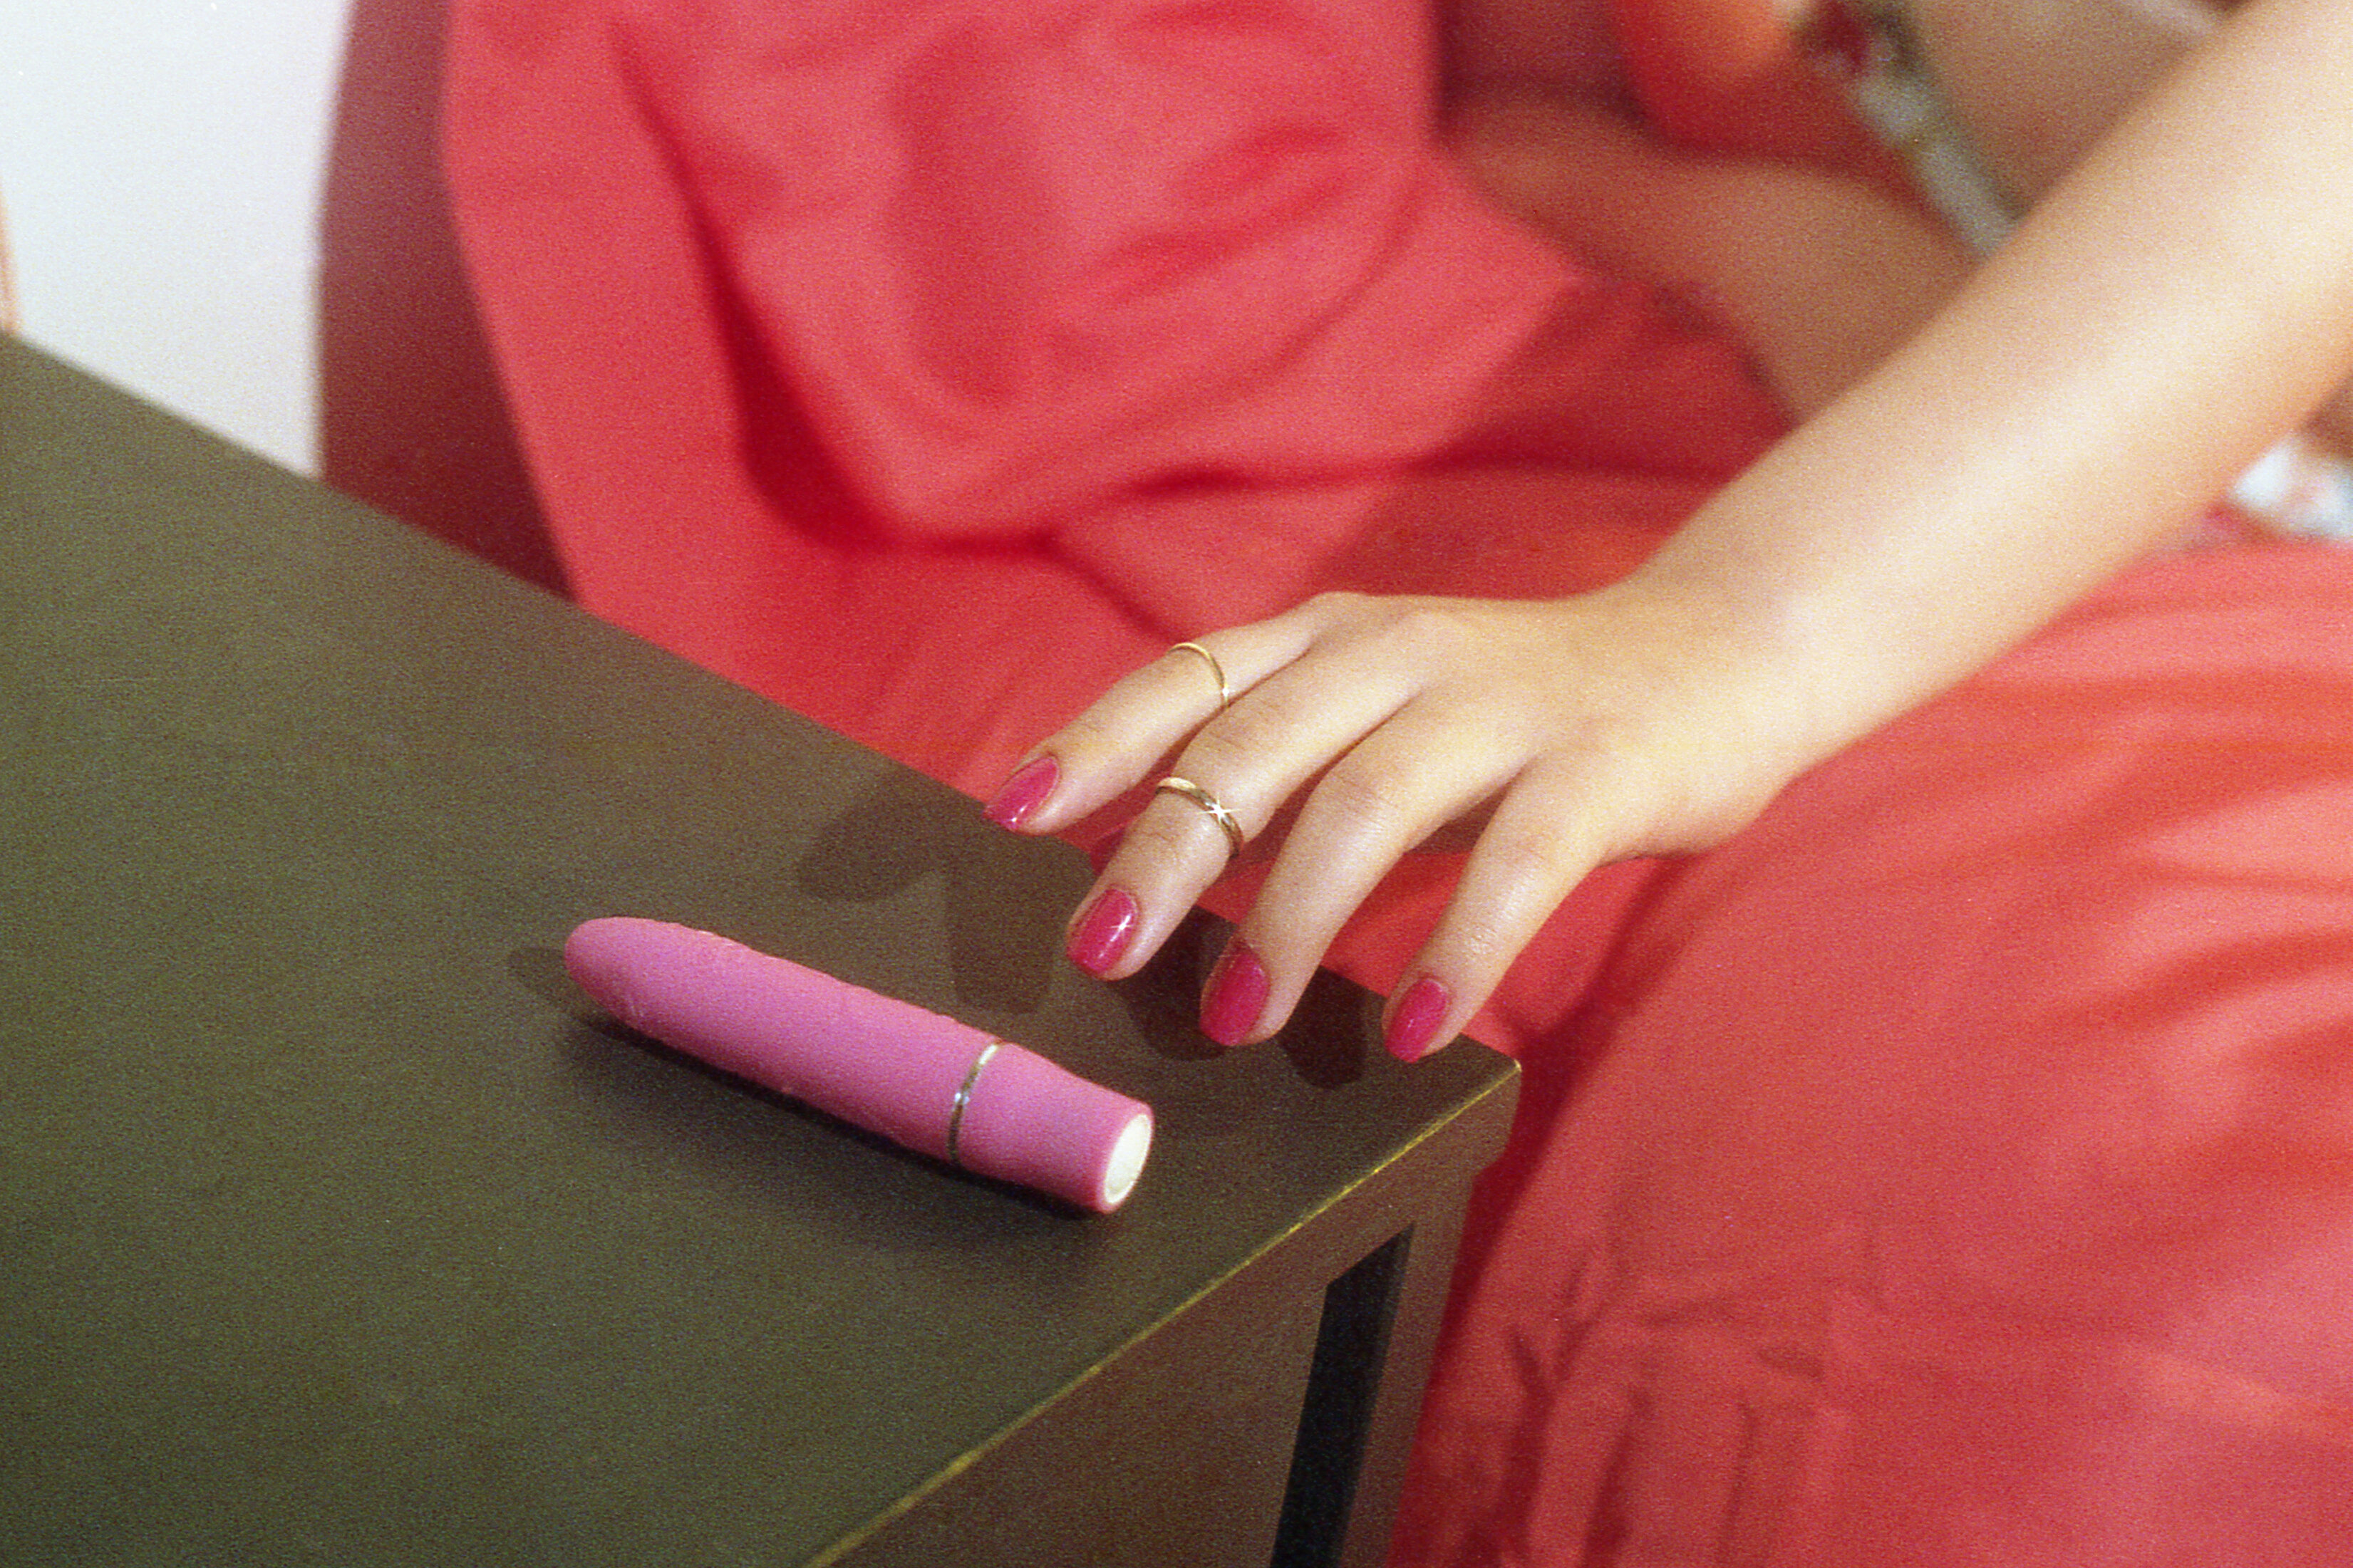 A person&#x27;s hand with rings resting next to a pink object on a dark surface, against a red fabric background